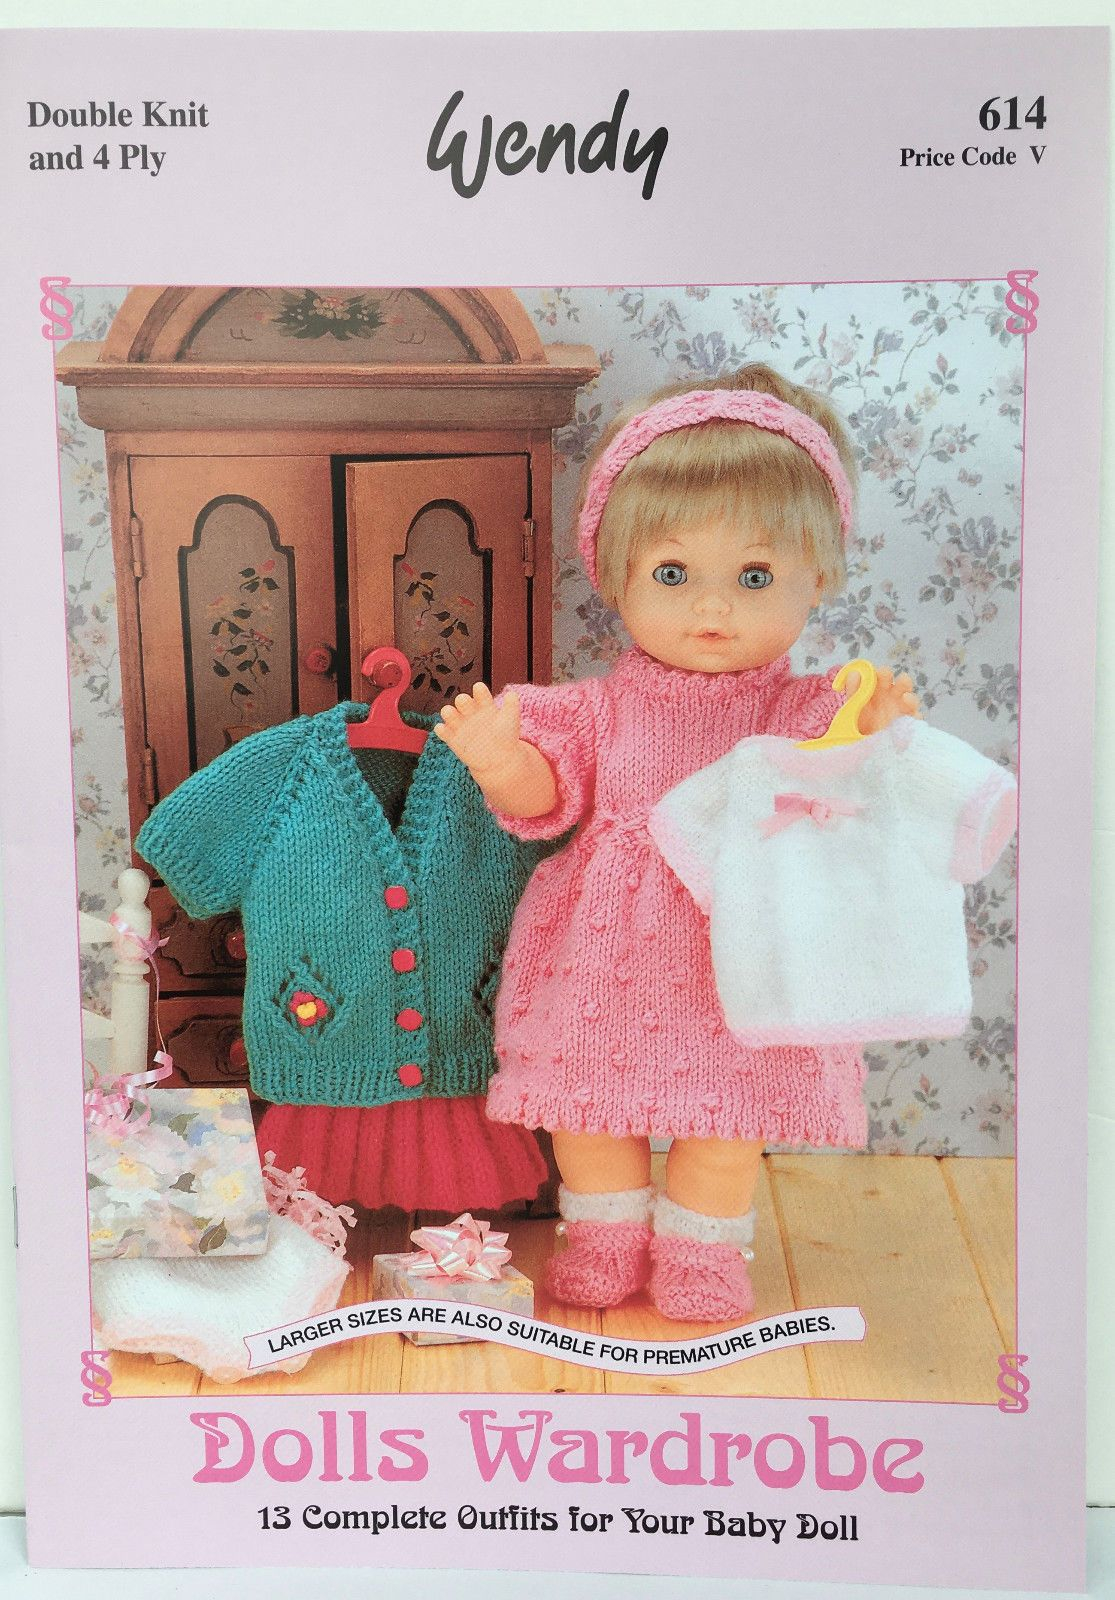 Double Knitting Baby Patterns Wendy Dolls Wardrobe Double Knit 4 Ply Knitting Pattern